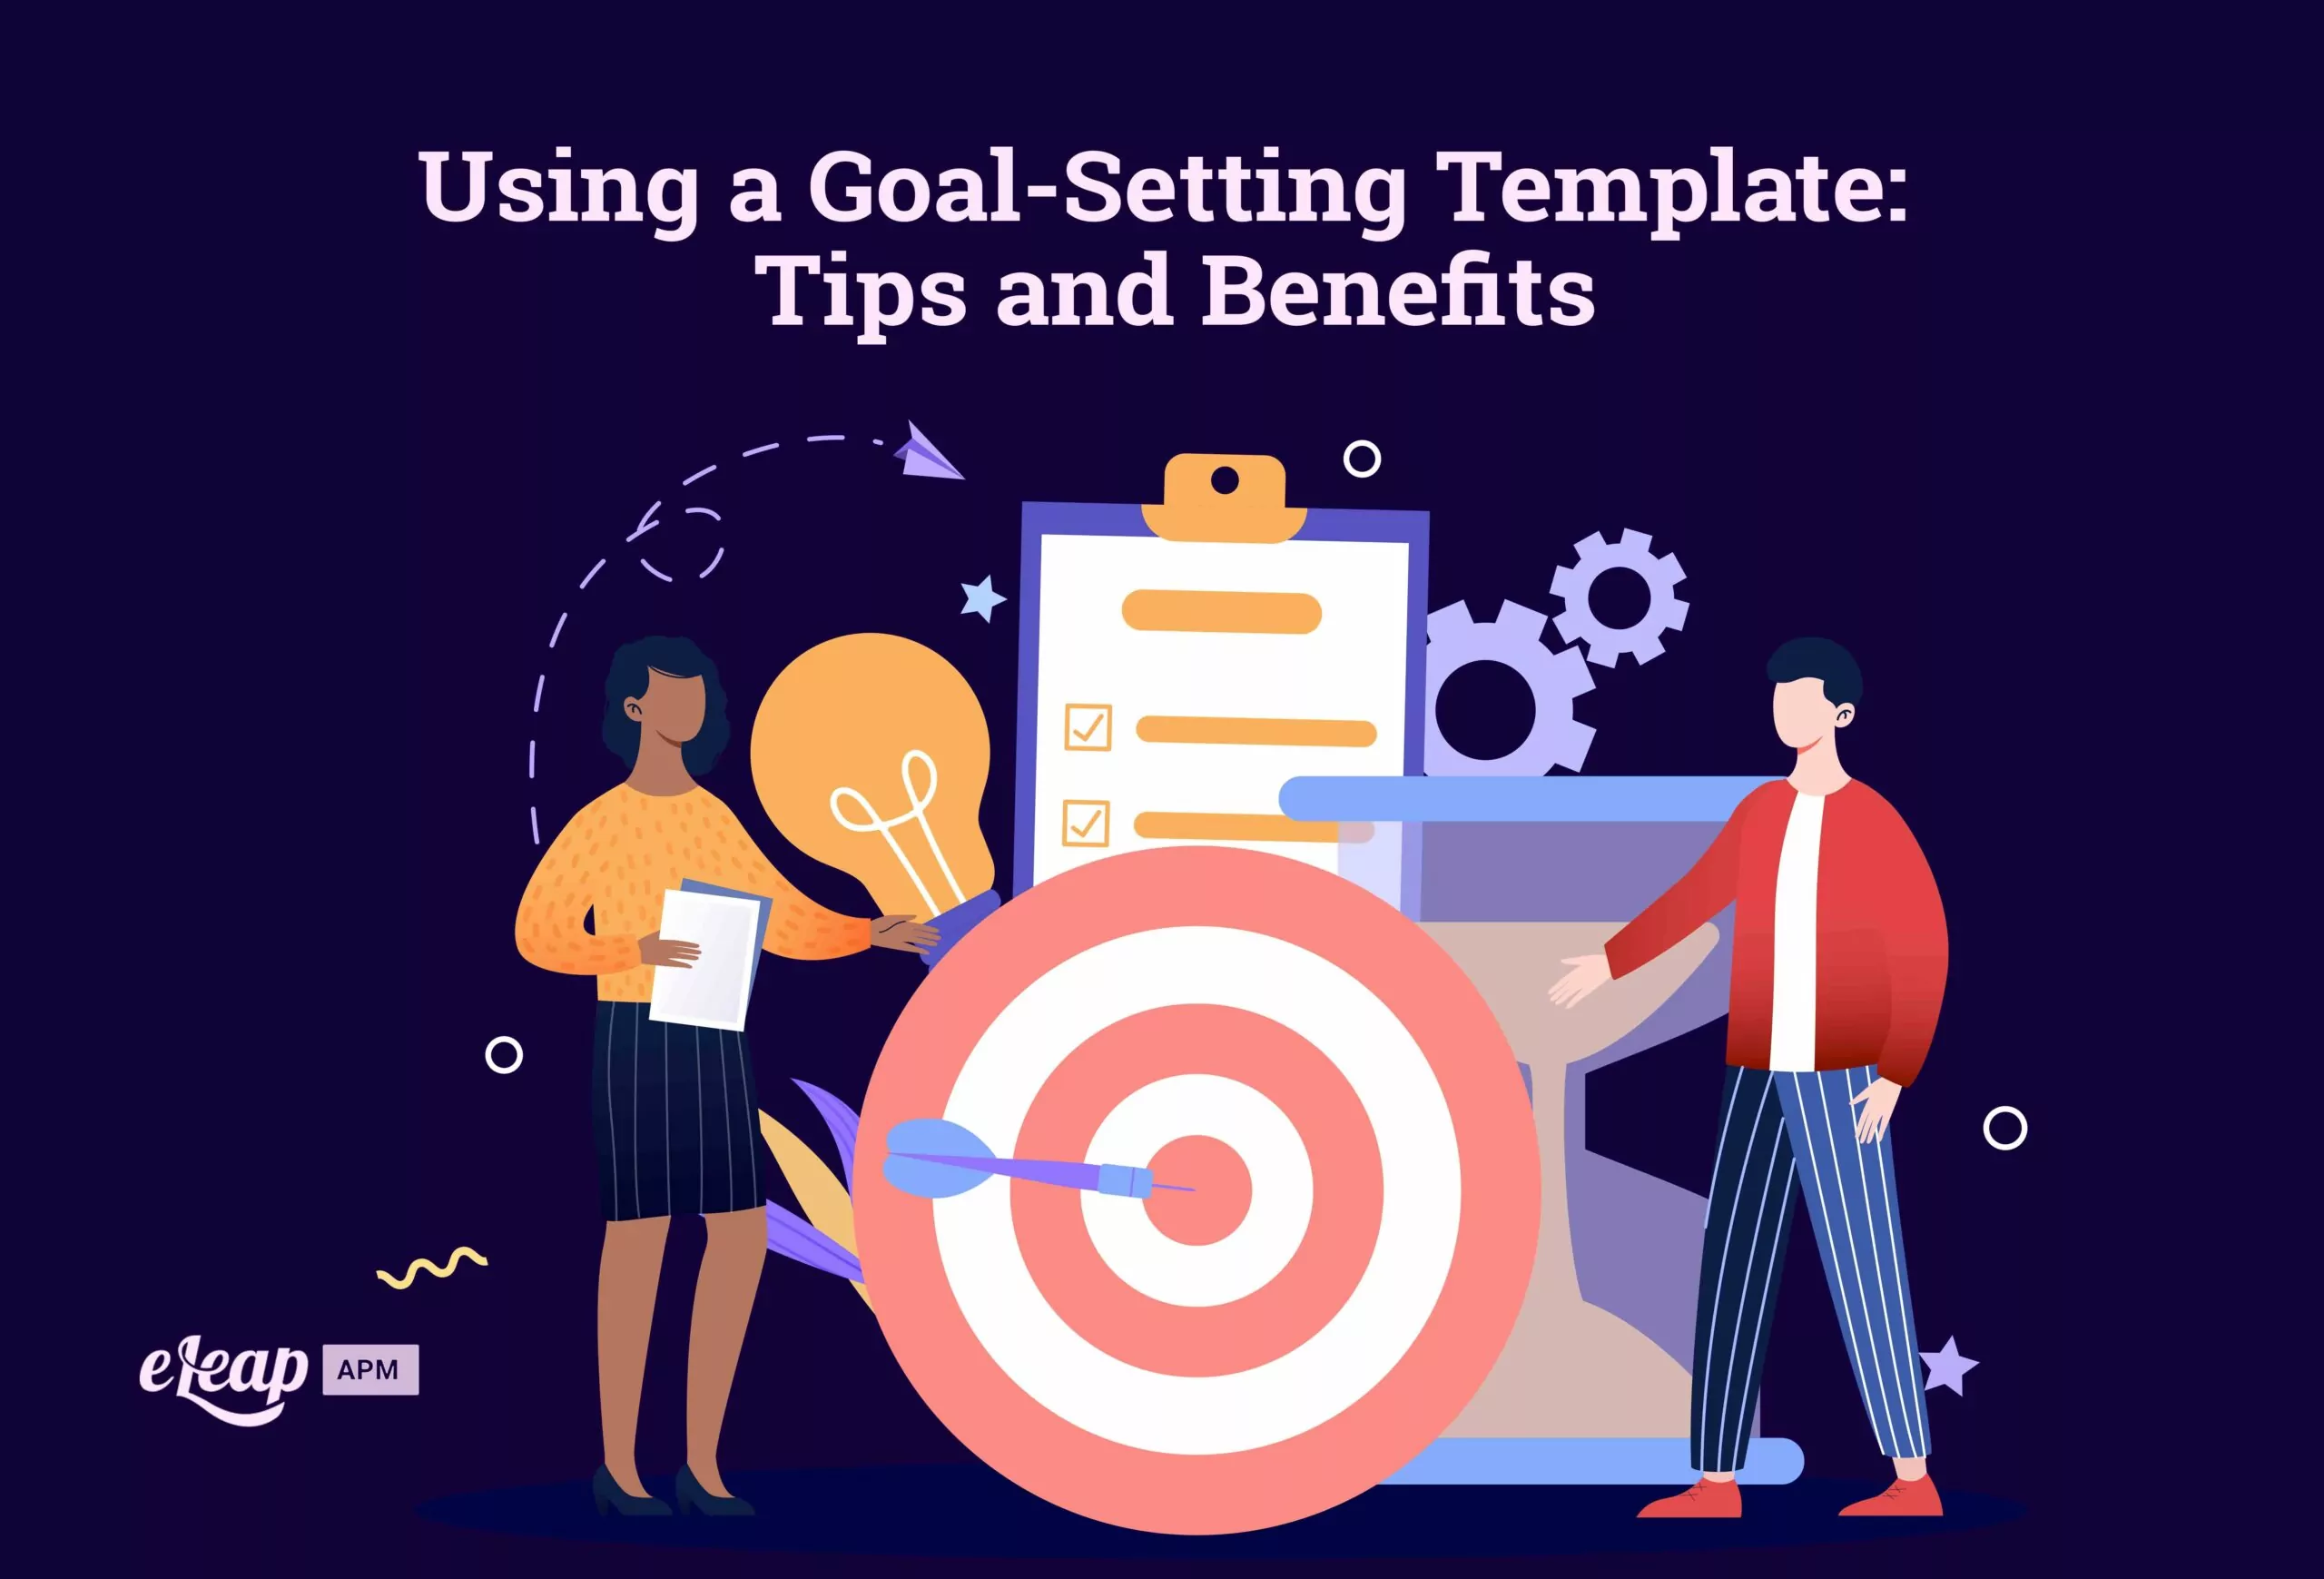 Using a Goal-Setting Template: Tips and Benefits